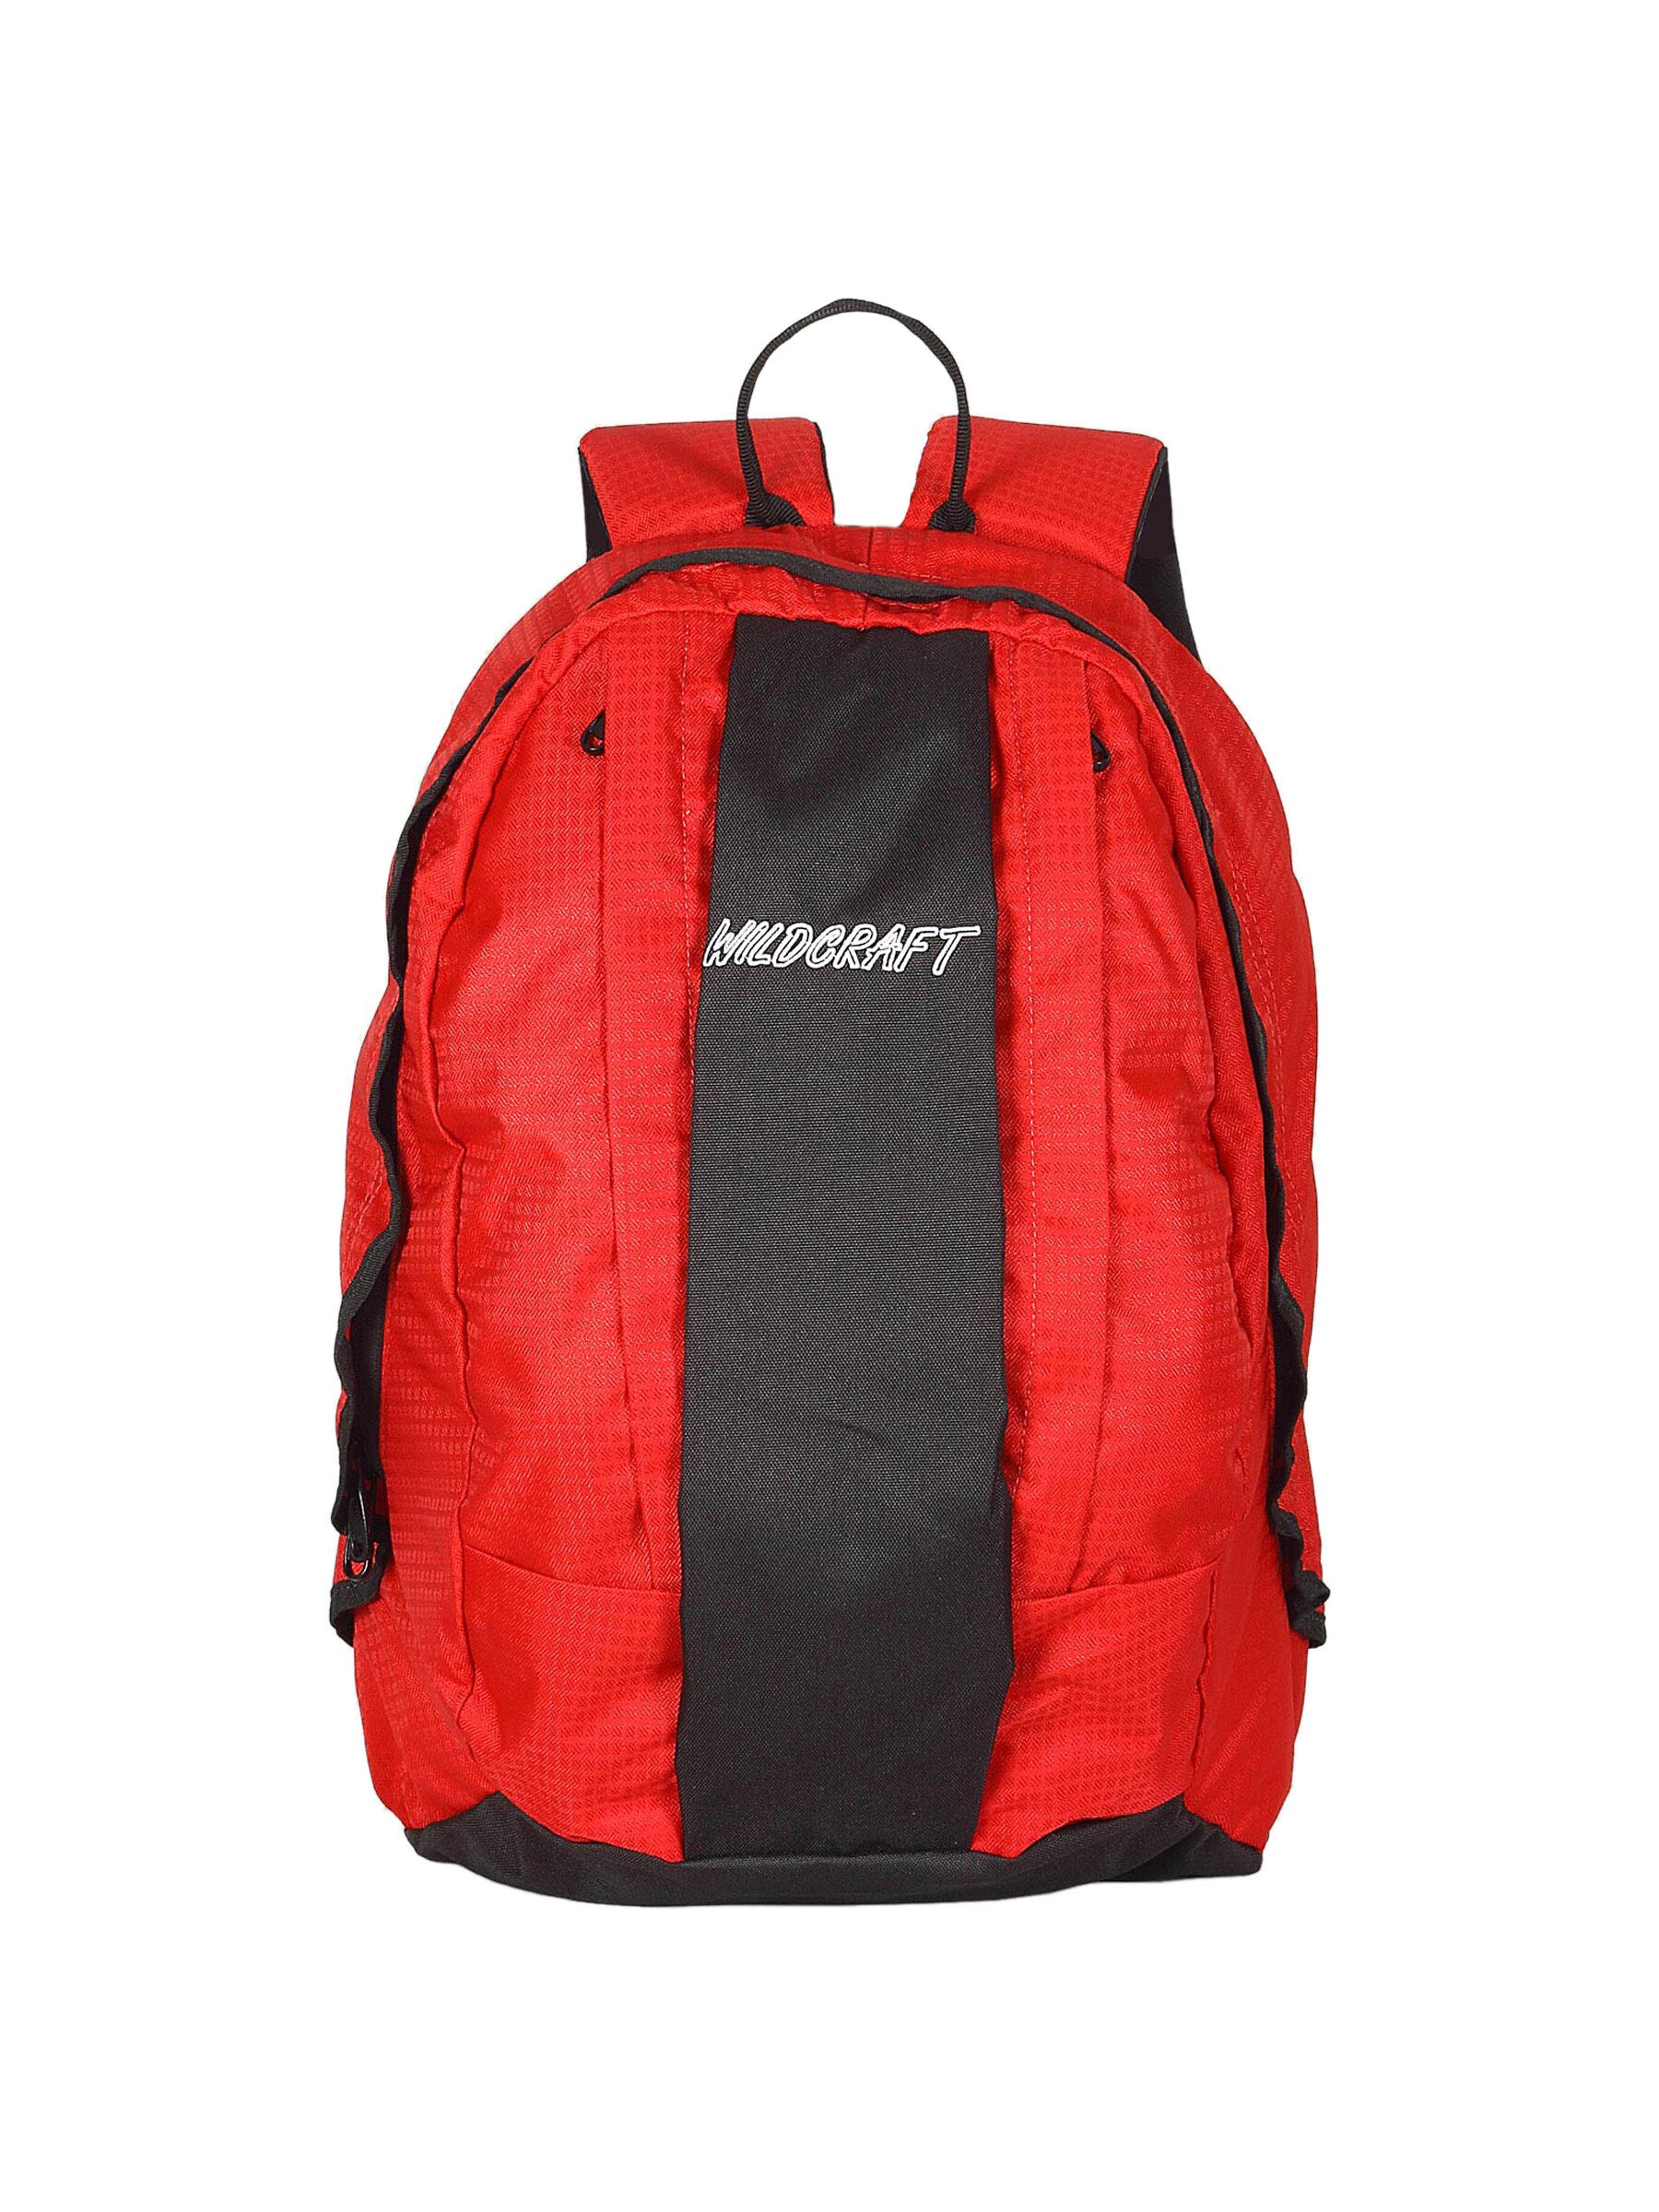 Wildcraft Unisex Contour Red Backpack